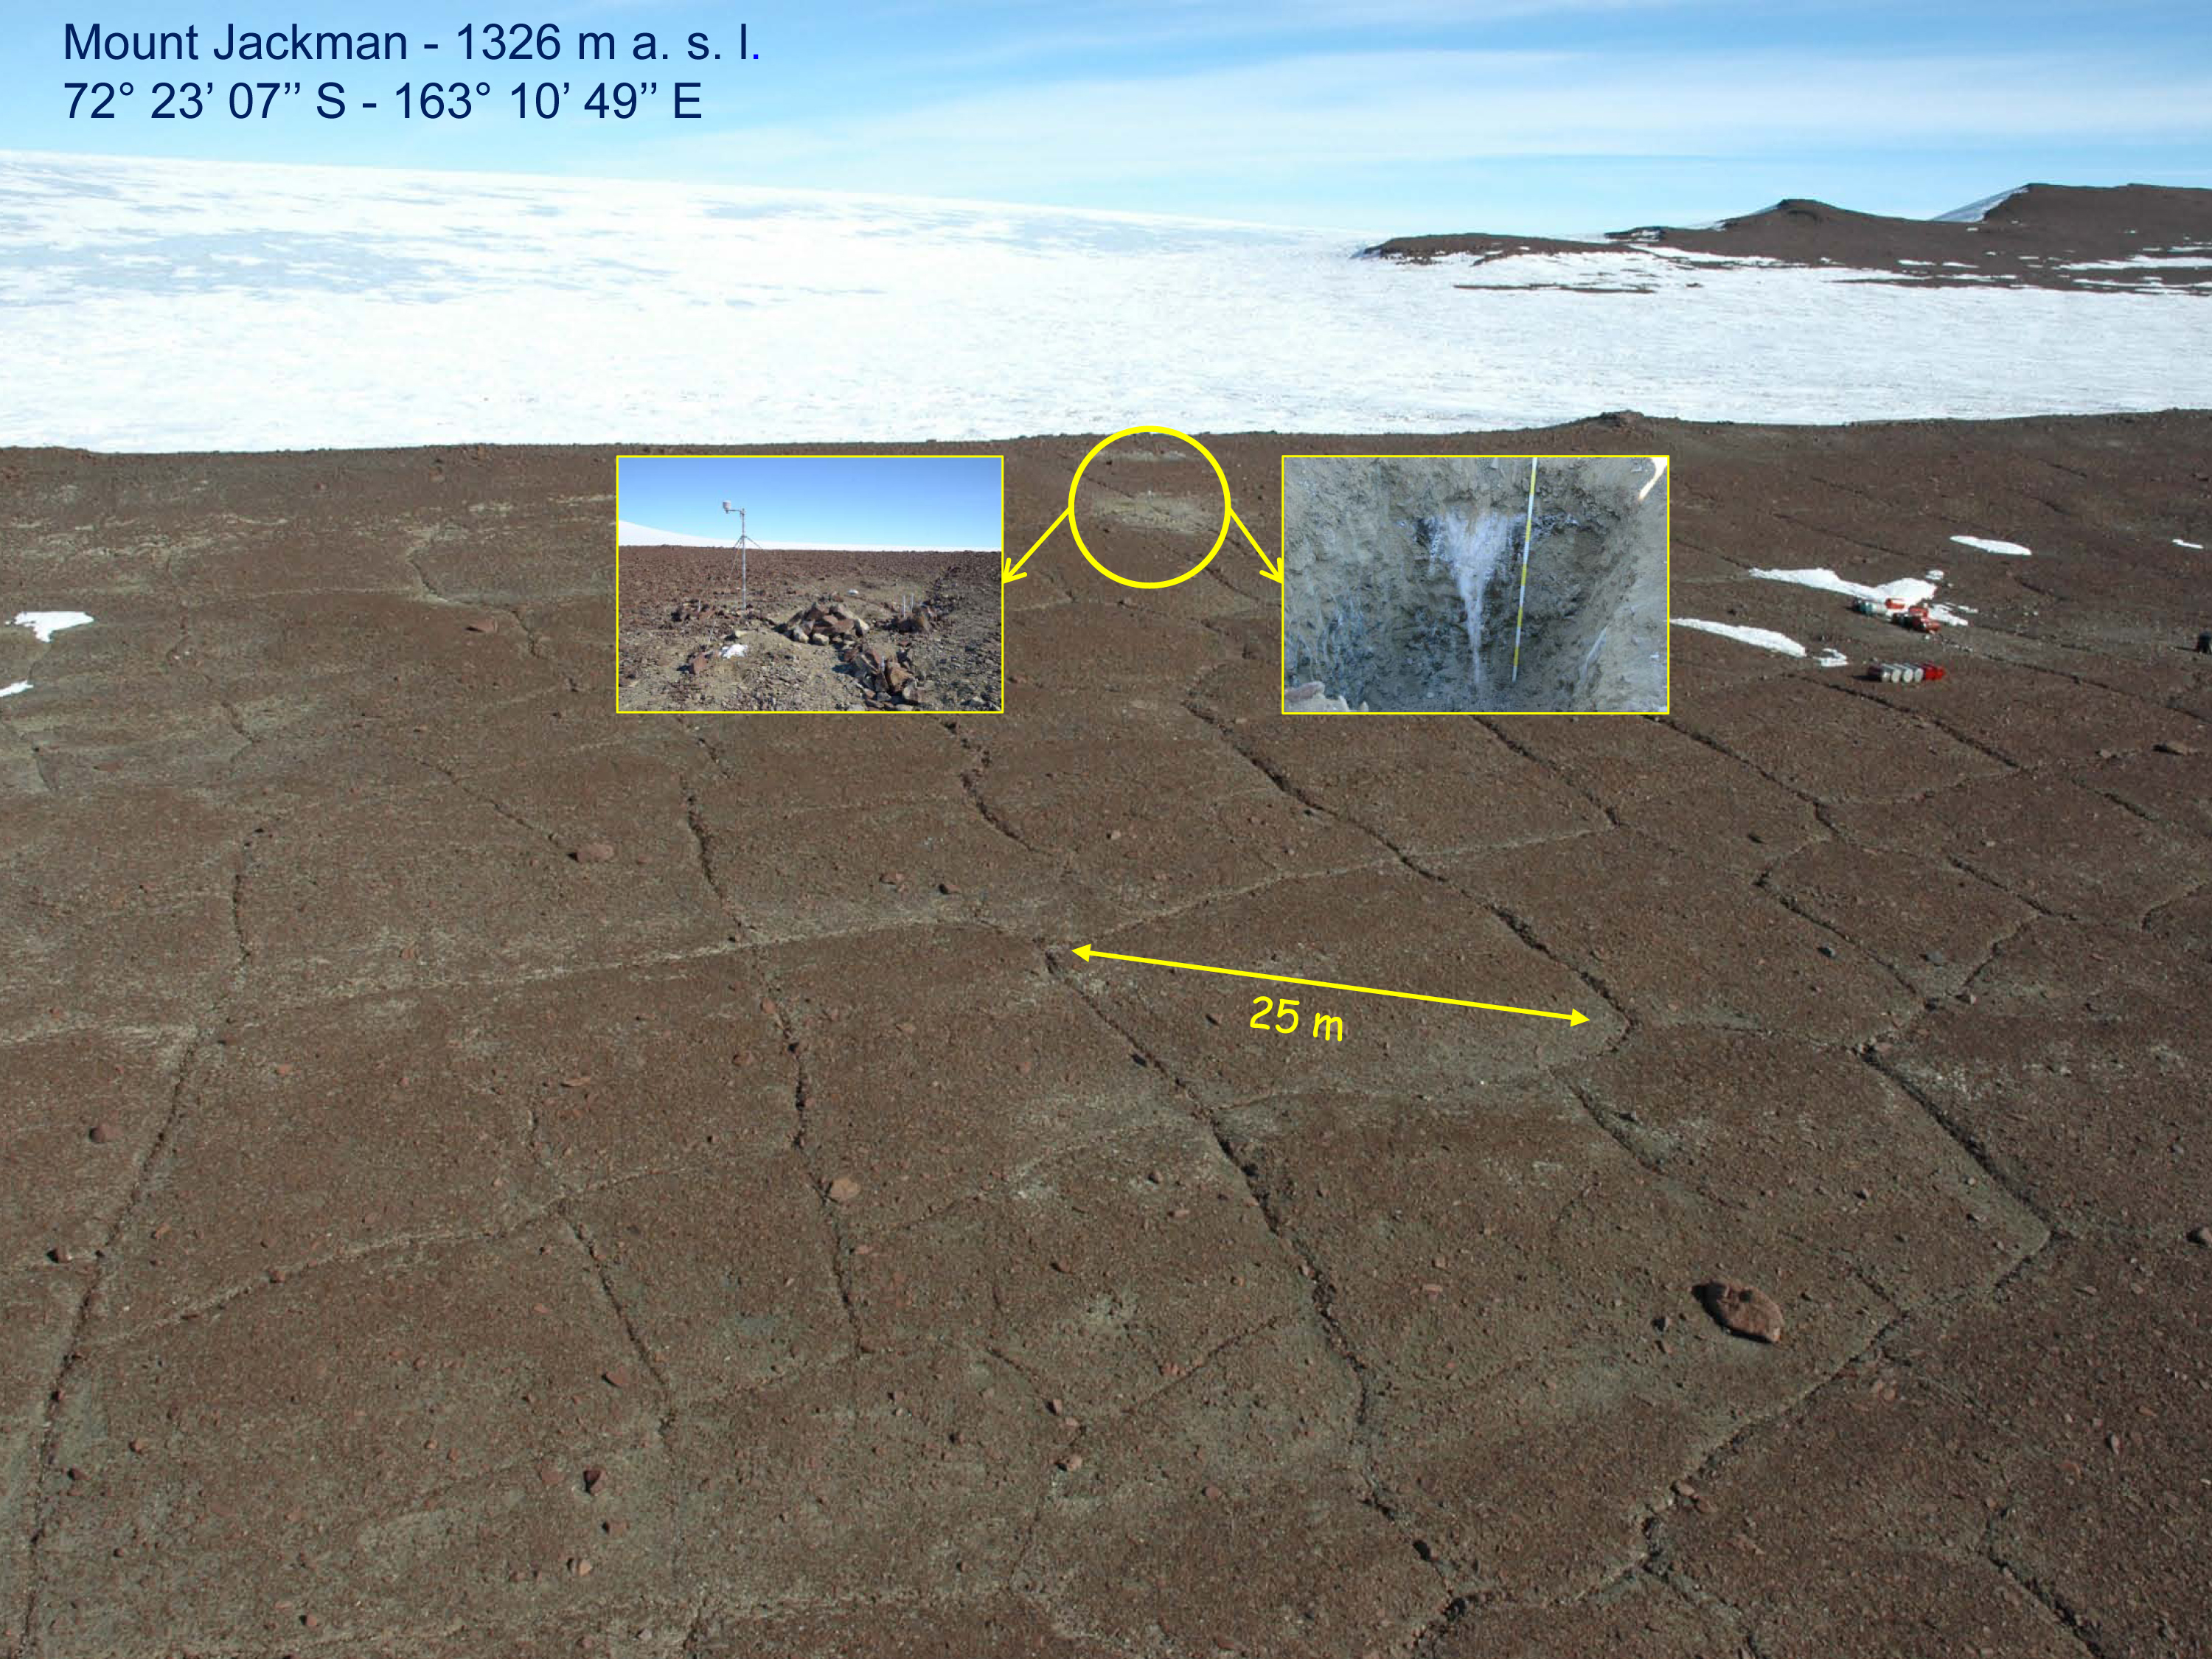 The ice-wedge polygon site of Mount Jackman is located in the upper sector of the Rennick Glacier in Northern Victoria Land, East Antarctica. Numerous sections were excavated across polygon troughs to a depth of about 1.5 m for sampling ice-wedge ice. In 2006, five sensors recording hourly temperatures of air and ice wedge at different depths were set up.